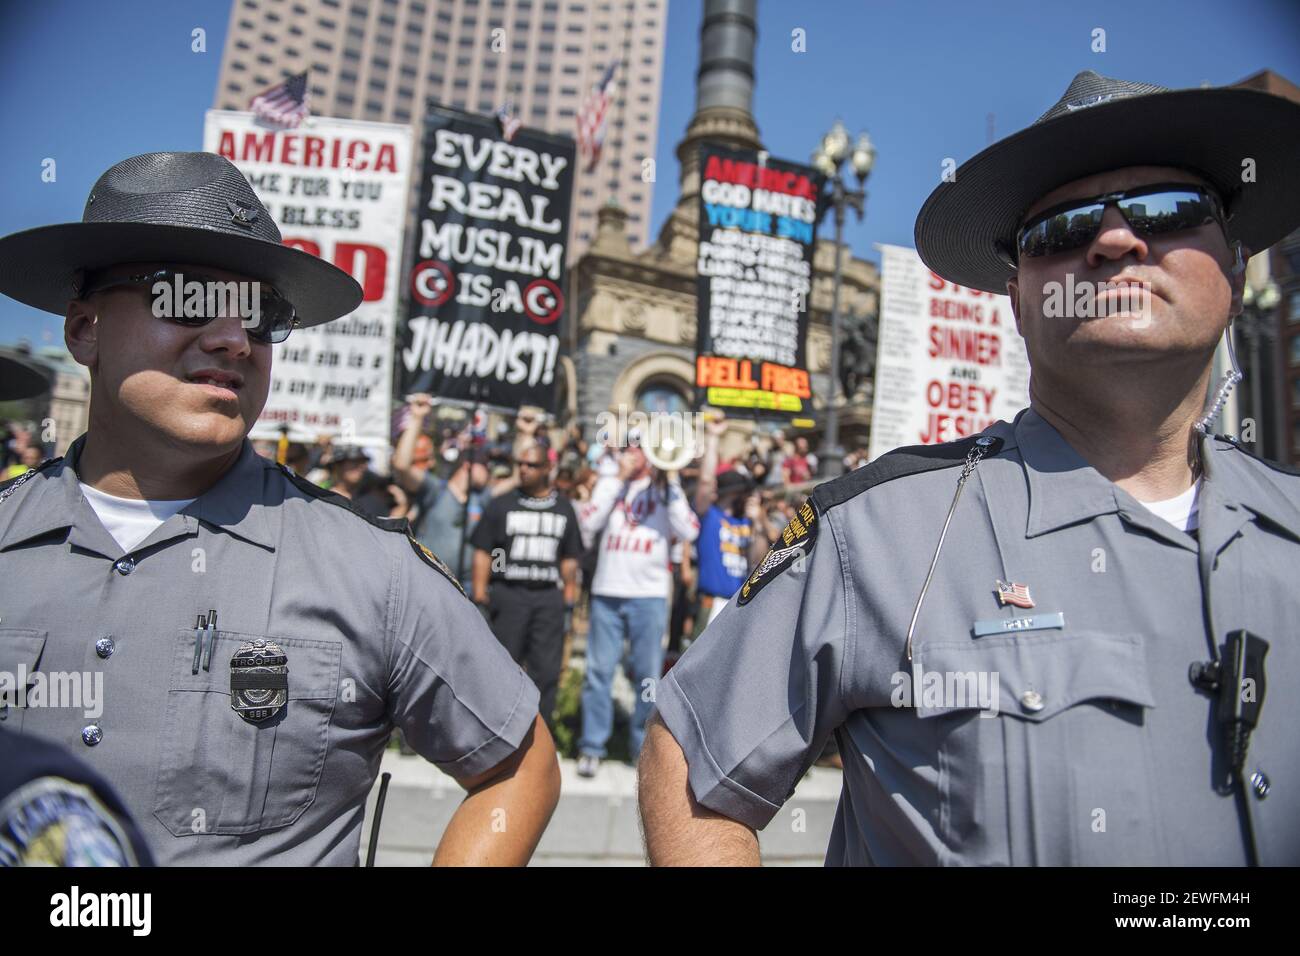 UNITED STATES - JULY 19: Police stand guard in the Public Square near the Republican National Convention at the Quicken Loans Arena in Cleveland, Ohio, July 19, 2016. (Photo By Tom Williams/CQ Roll Call) *** Please Use Credit from Credit Field *** Stock Photo